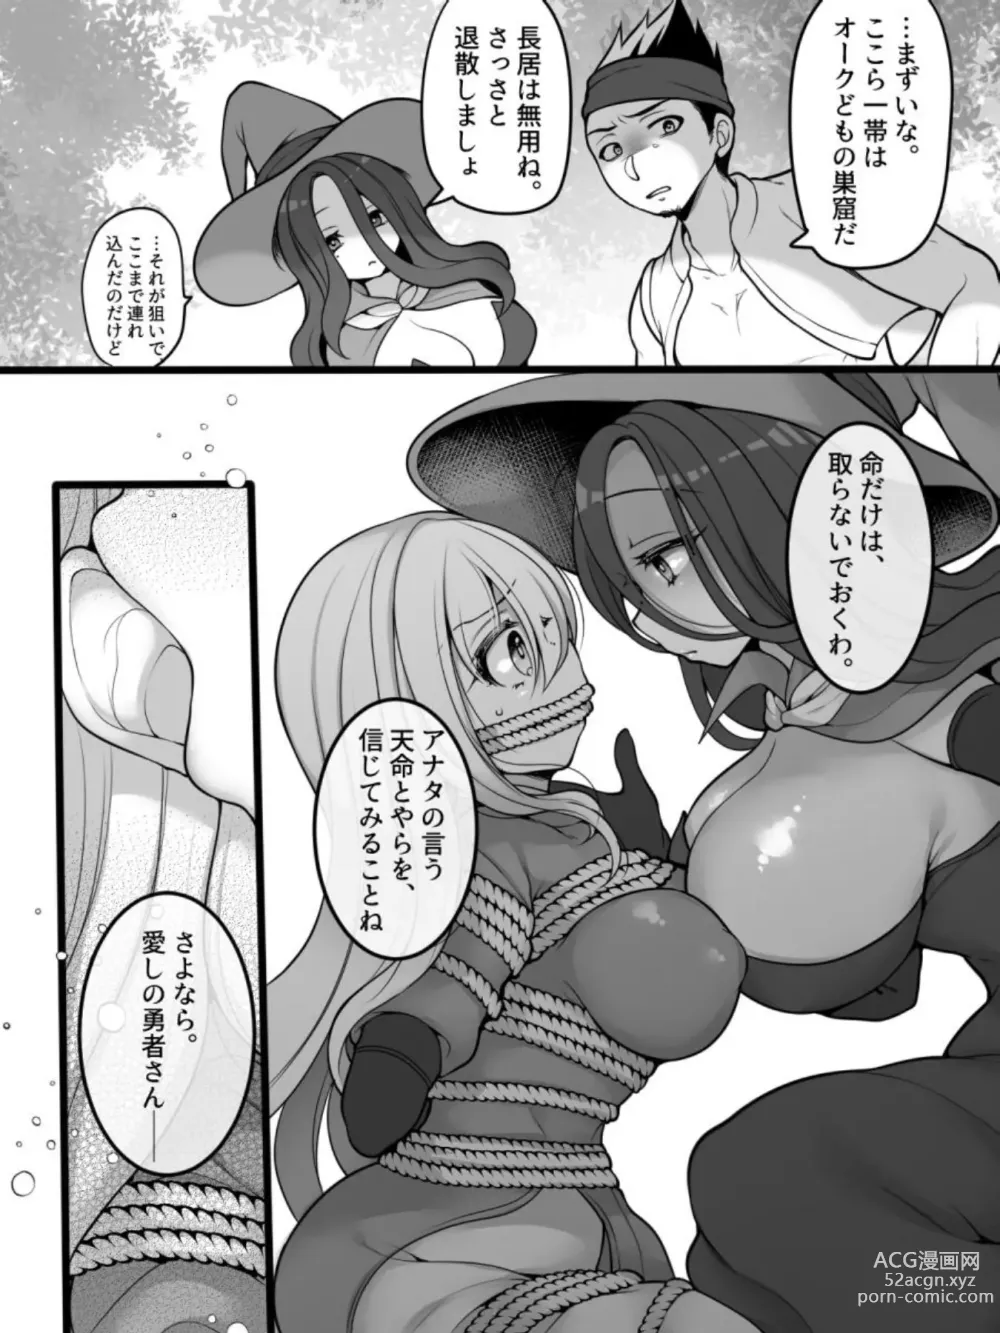 Page 6 of doujinshi TS Impregnated Princess ~A story about a former hero who becomes the princess of a group of orcs~